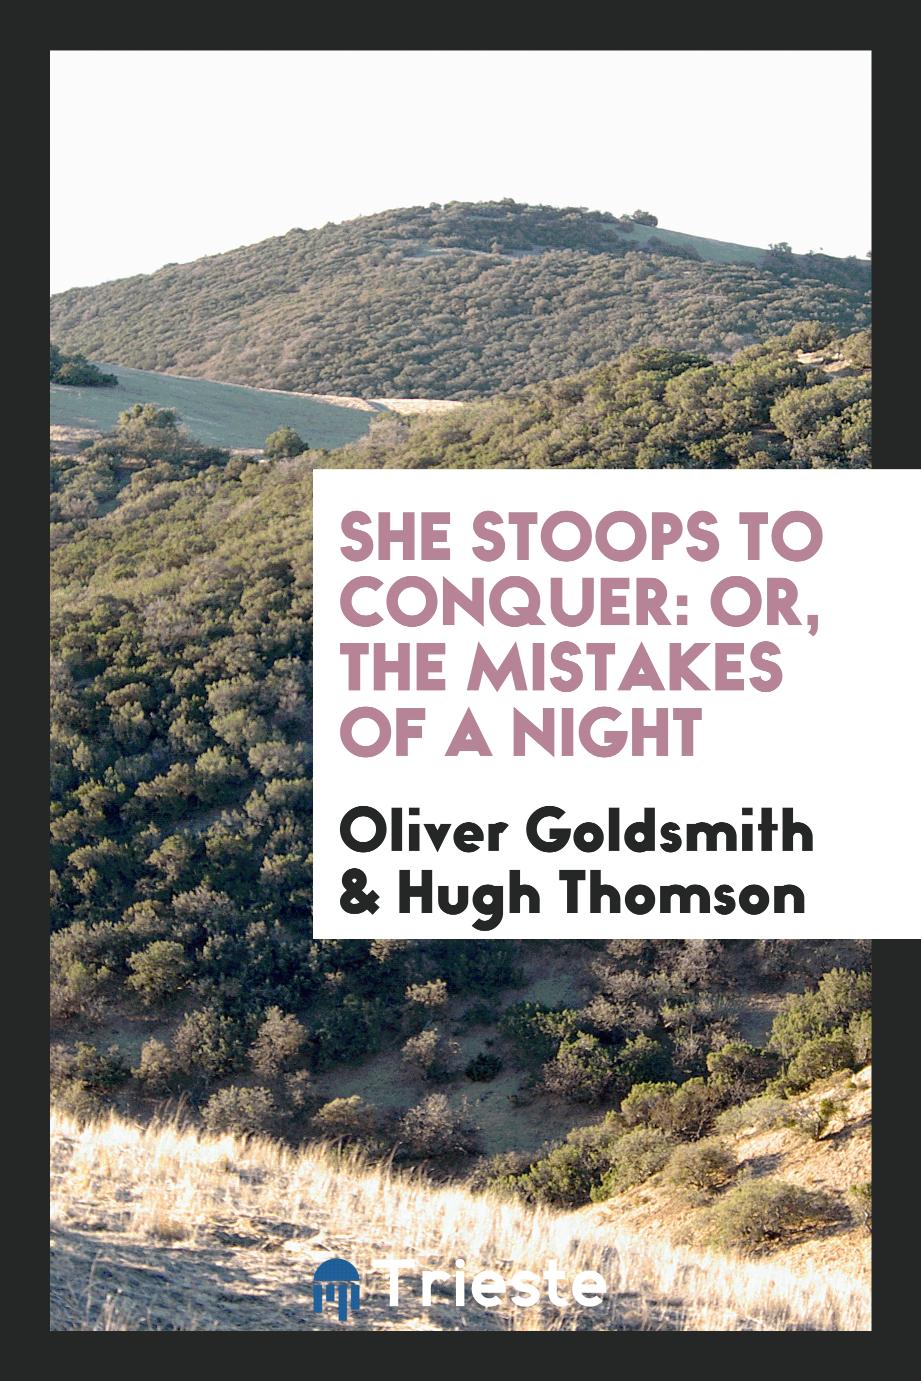 She stoops to conquer: or, The mistakes of a night